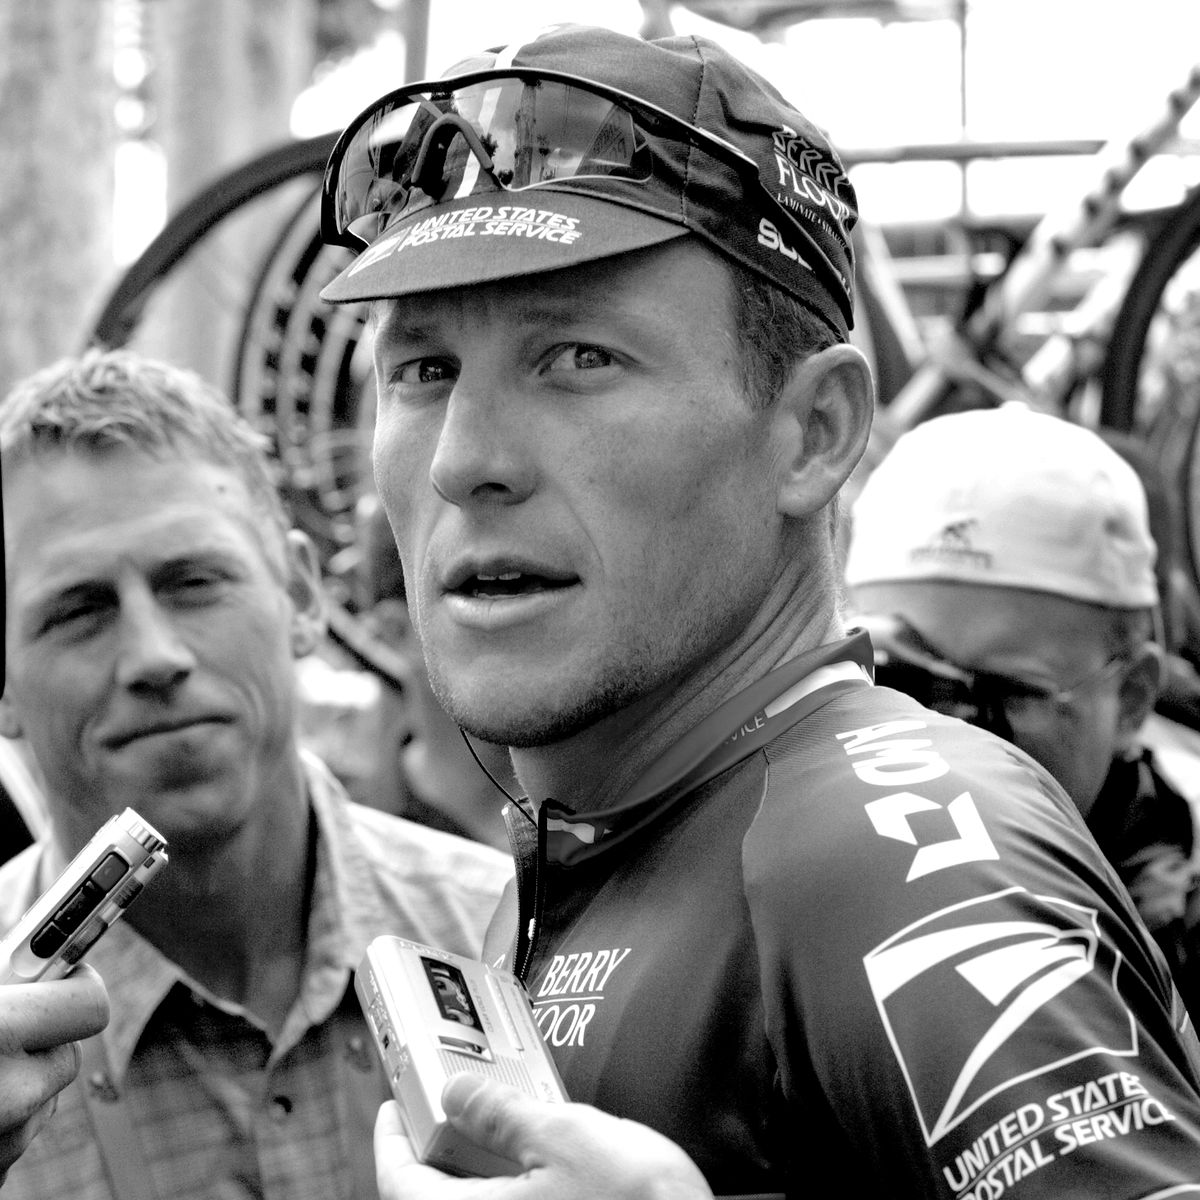 lance armstrong being interviewed by reporters on race day during his time with the us postal service team